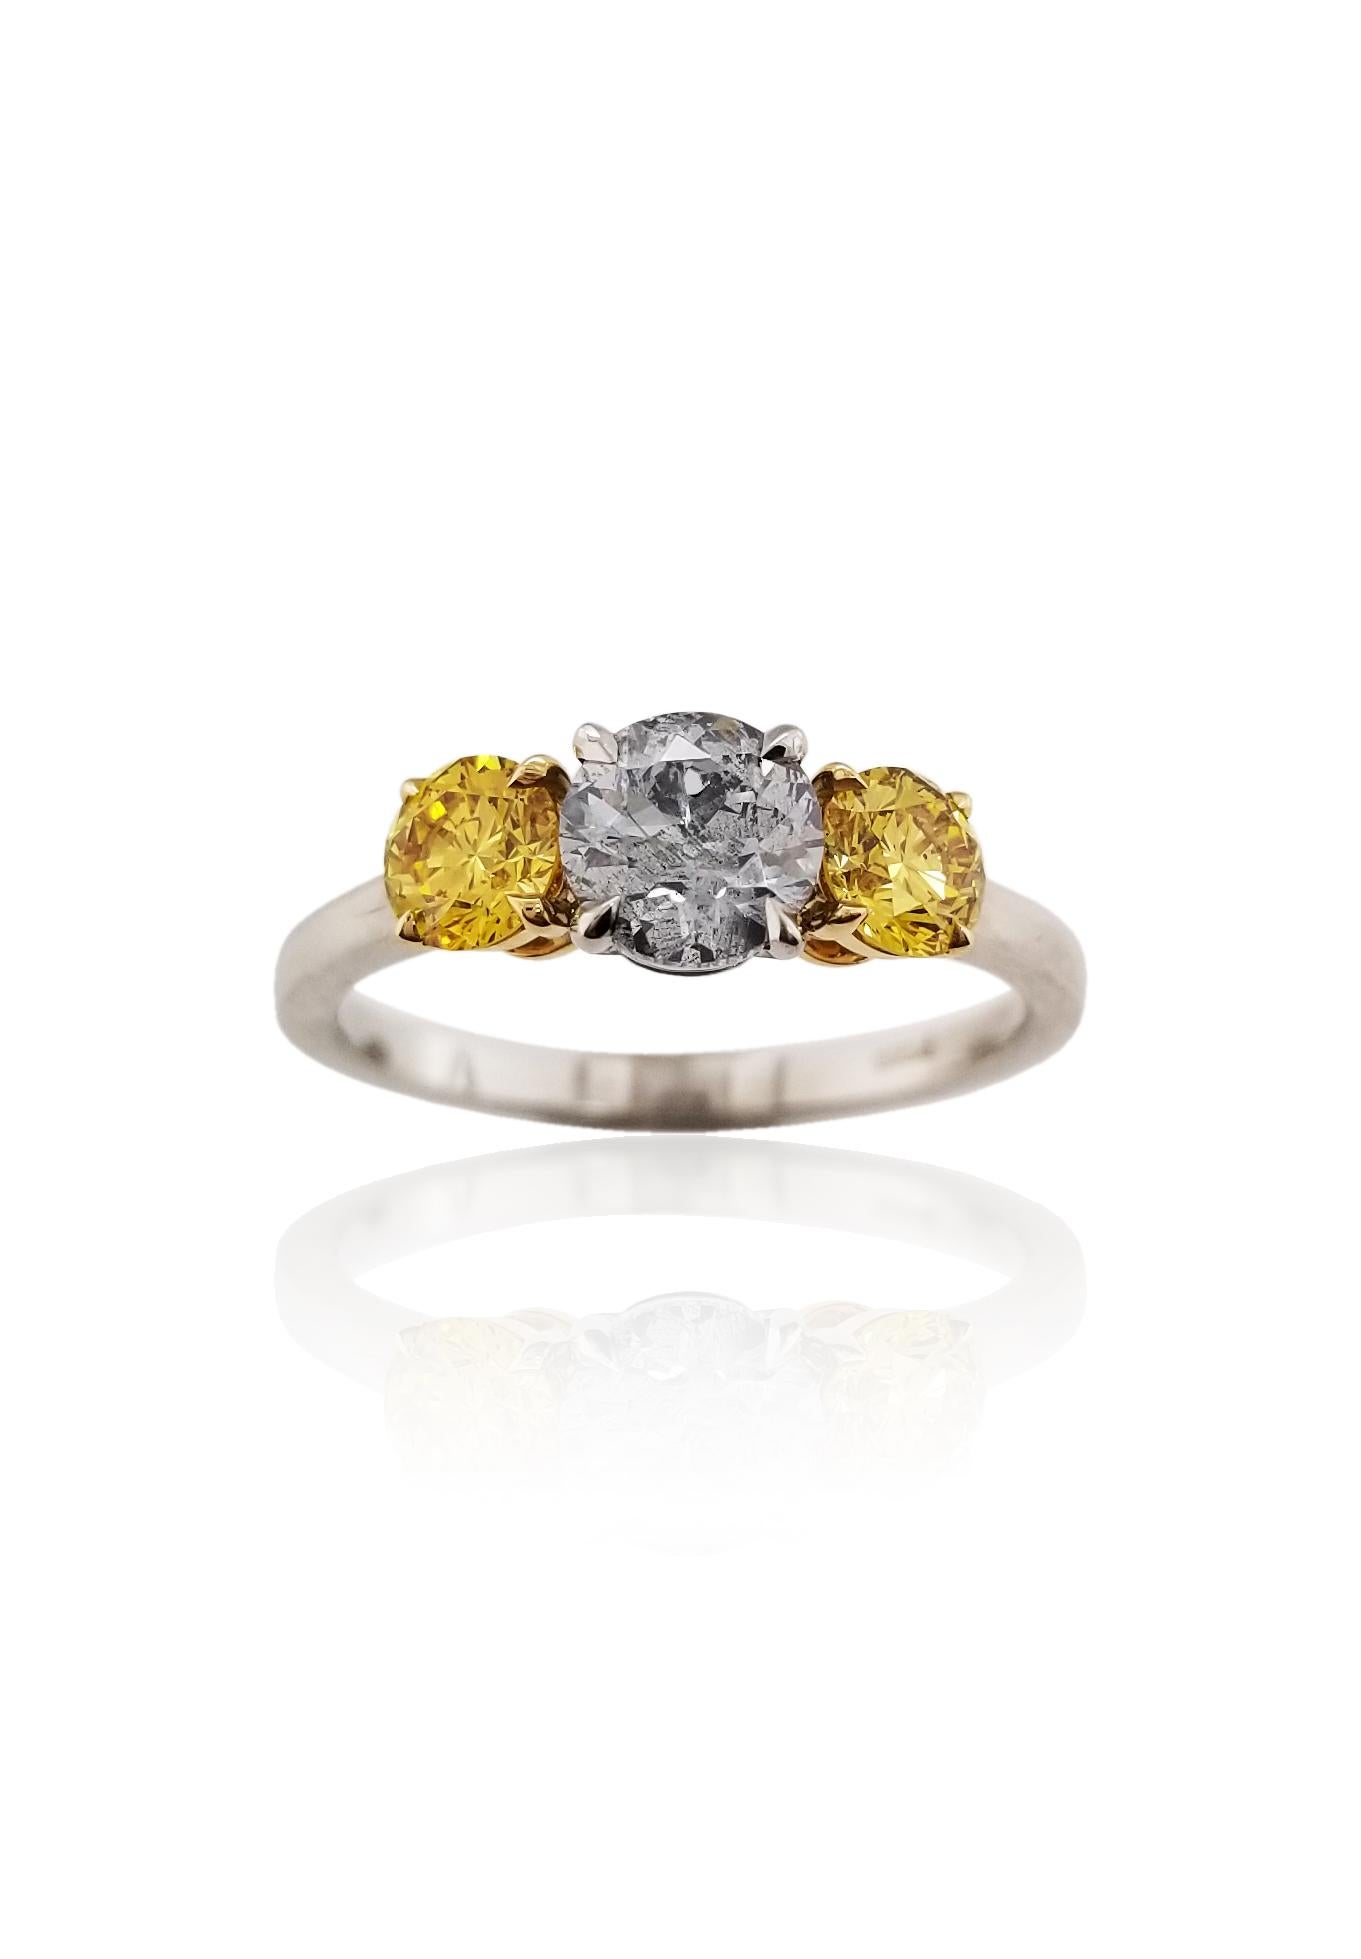 Women's Fancy Gray-Blue and Vivid Yellow Diamonds Engagement Ring Jacket in Platinum GIA For Sale